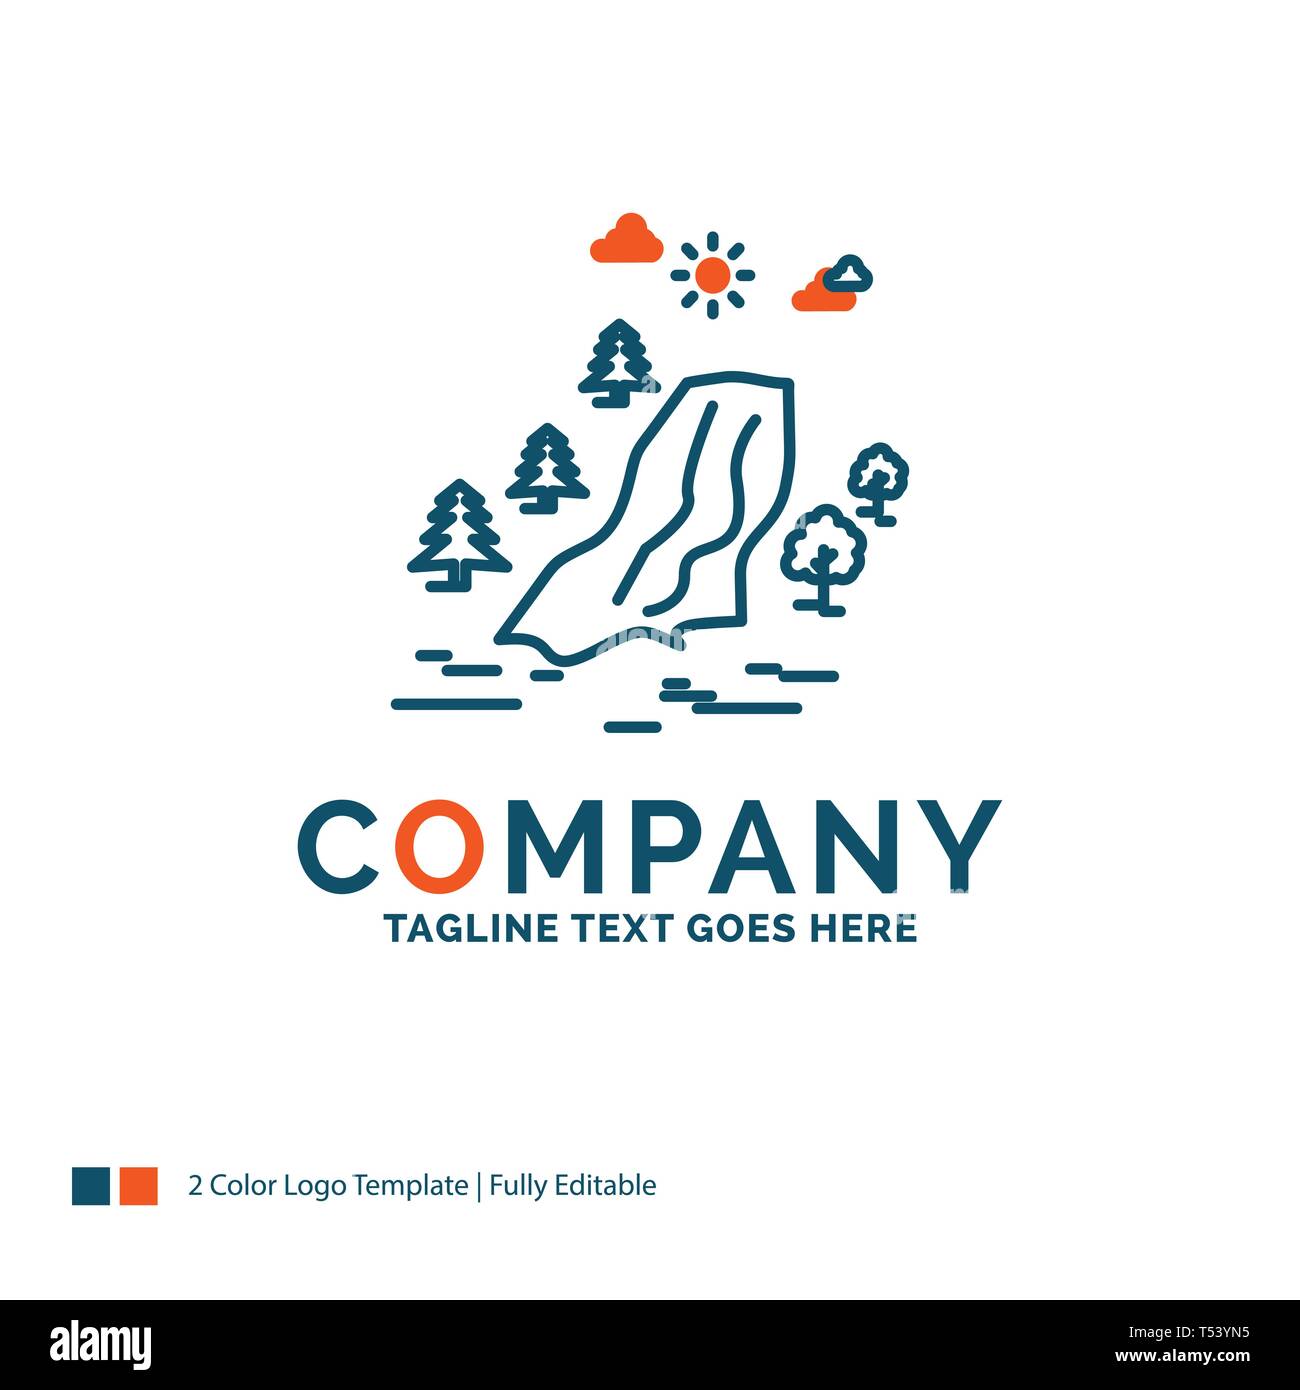 waterfall, tree, pain, clouds, nature Logo Design. Blue and Orange Brand Name Design. Place for Tagline. Business Logo template. Stock Vector